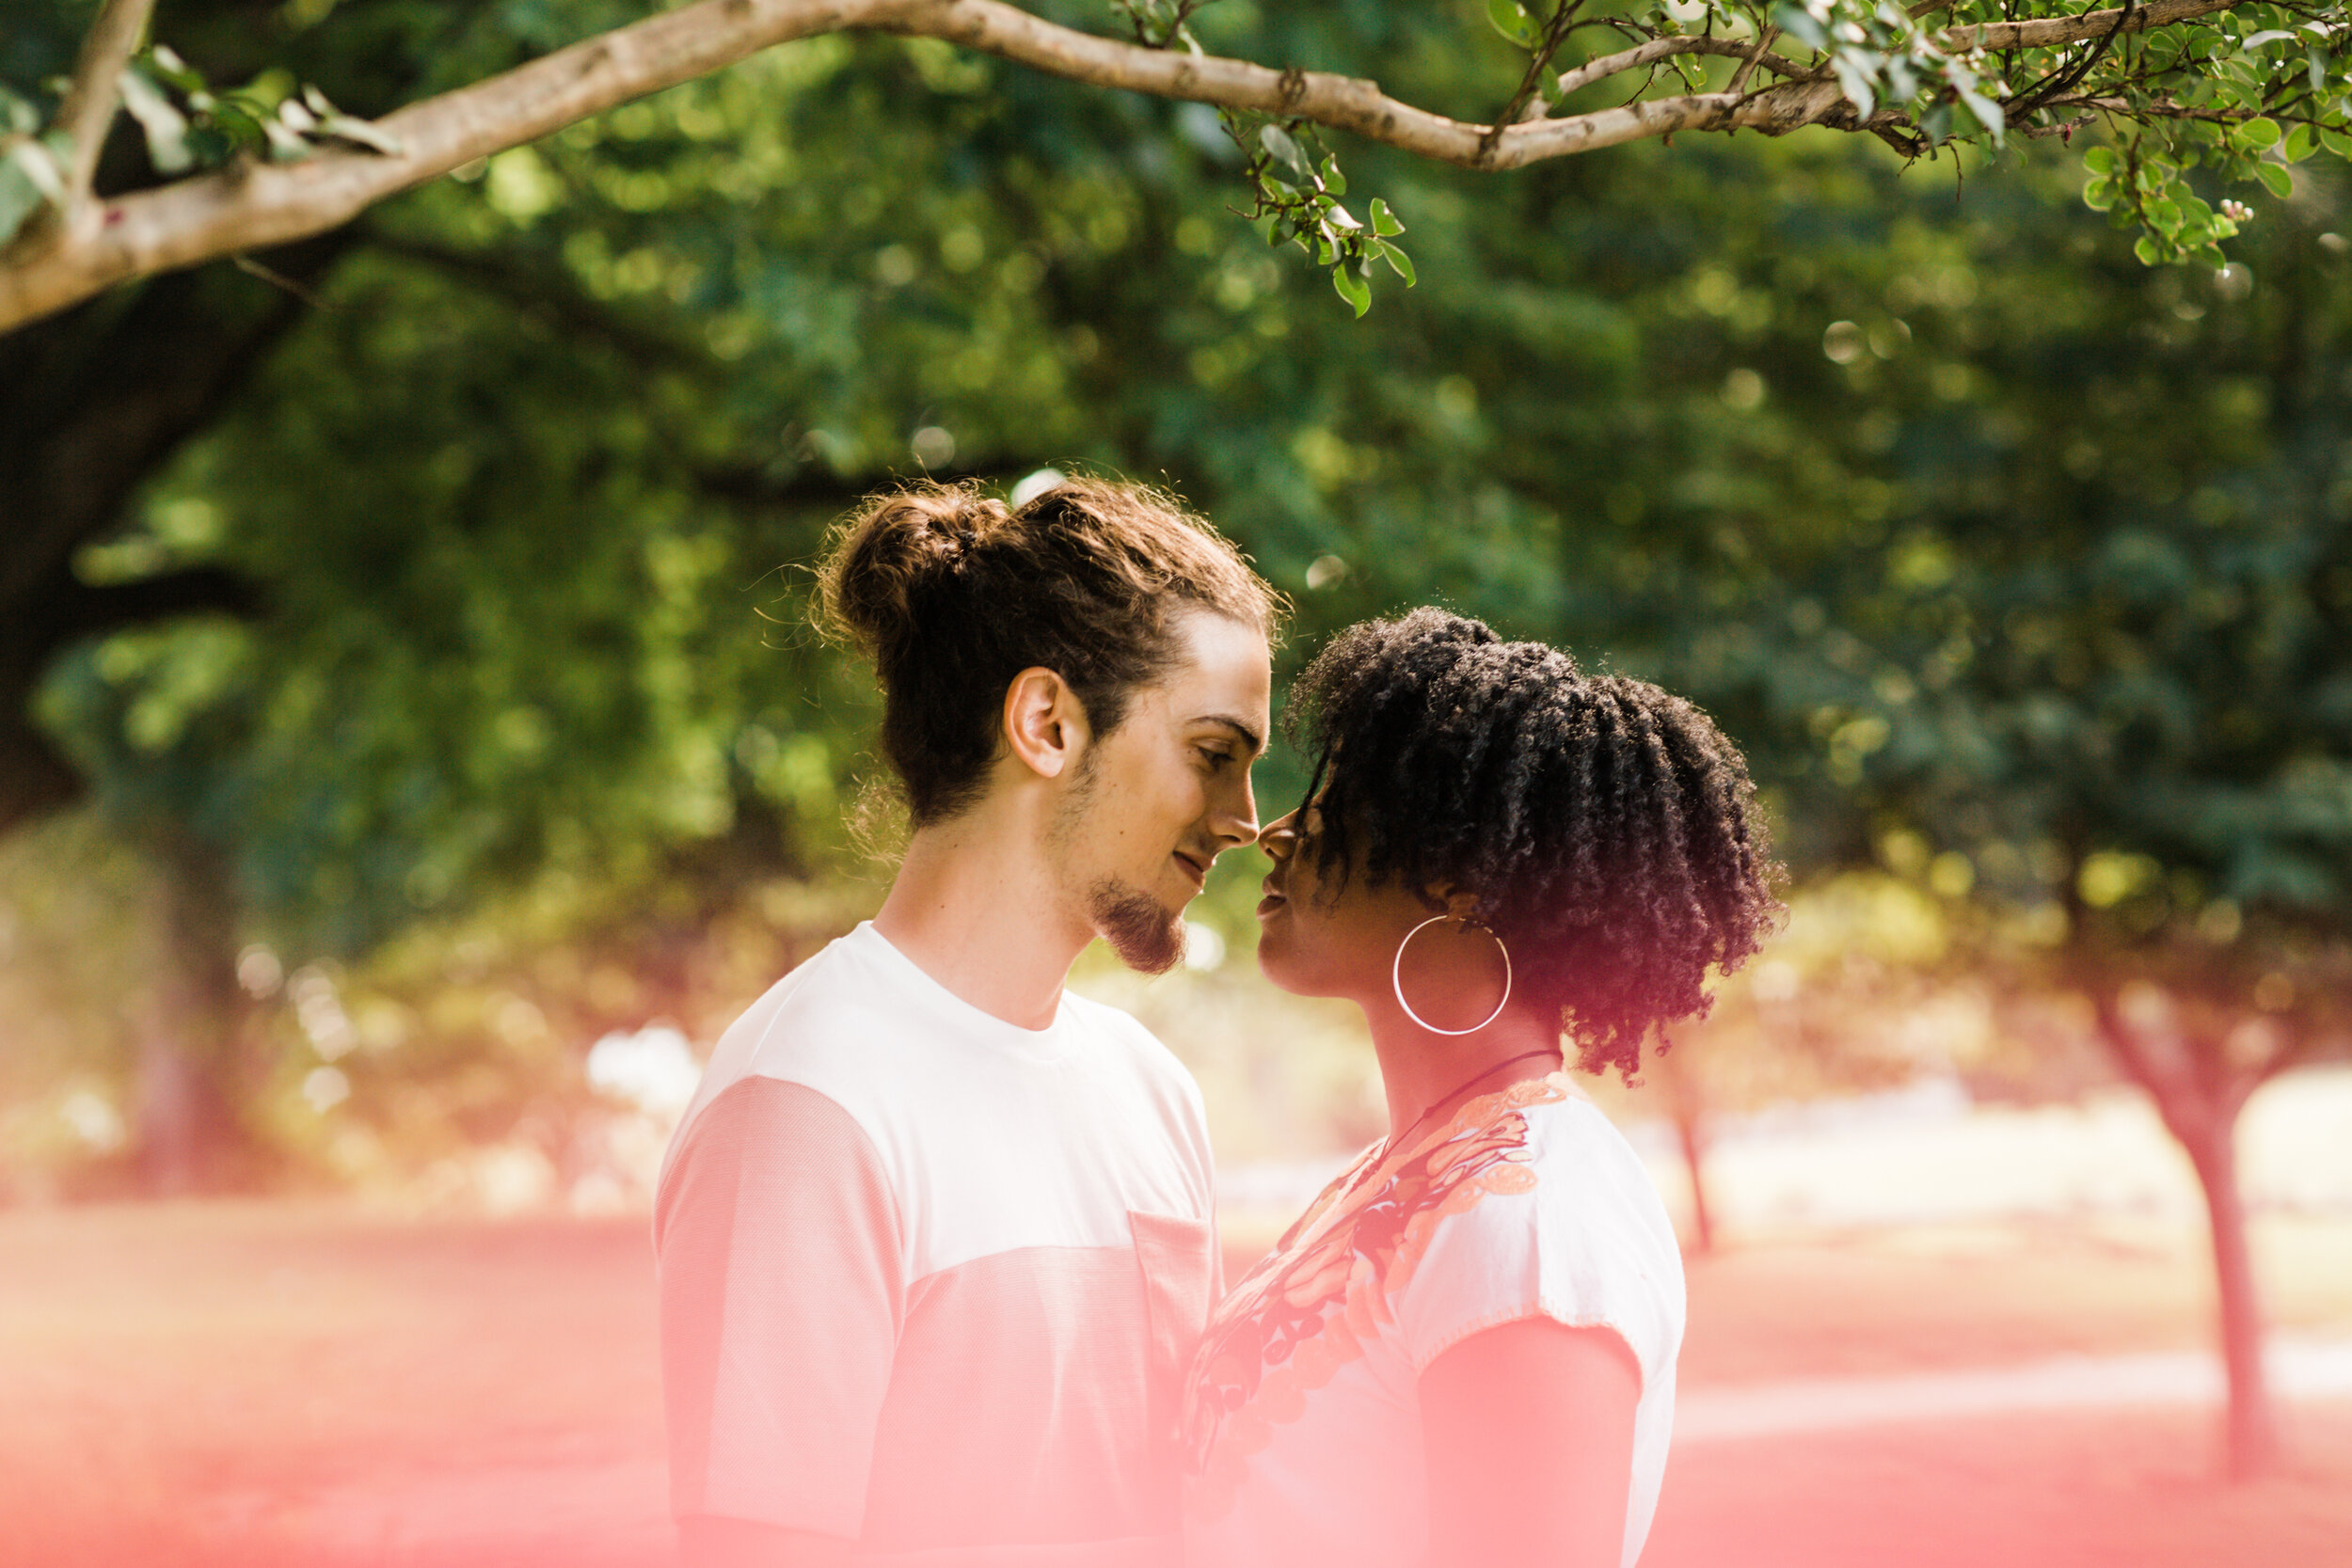 Golden Hour Engagement Session in Baltimore Maryland Patterson Park Pagoda DC Wedding Photographers Megapixels Media Photography and Videography Mixed Couple Multiracial Bride and Groom-43.jpg